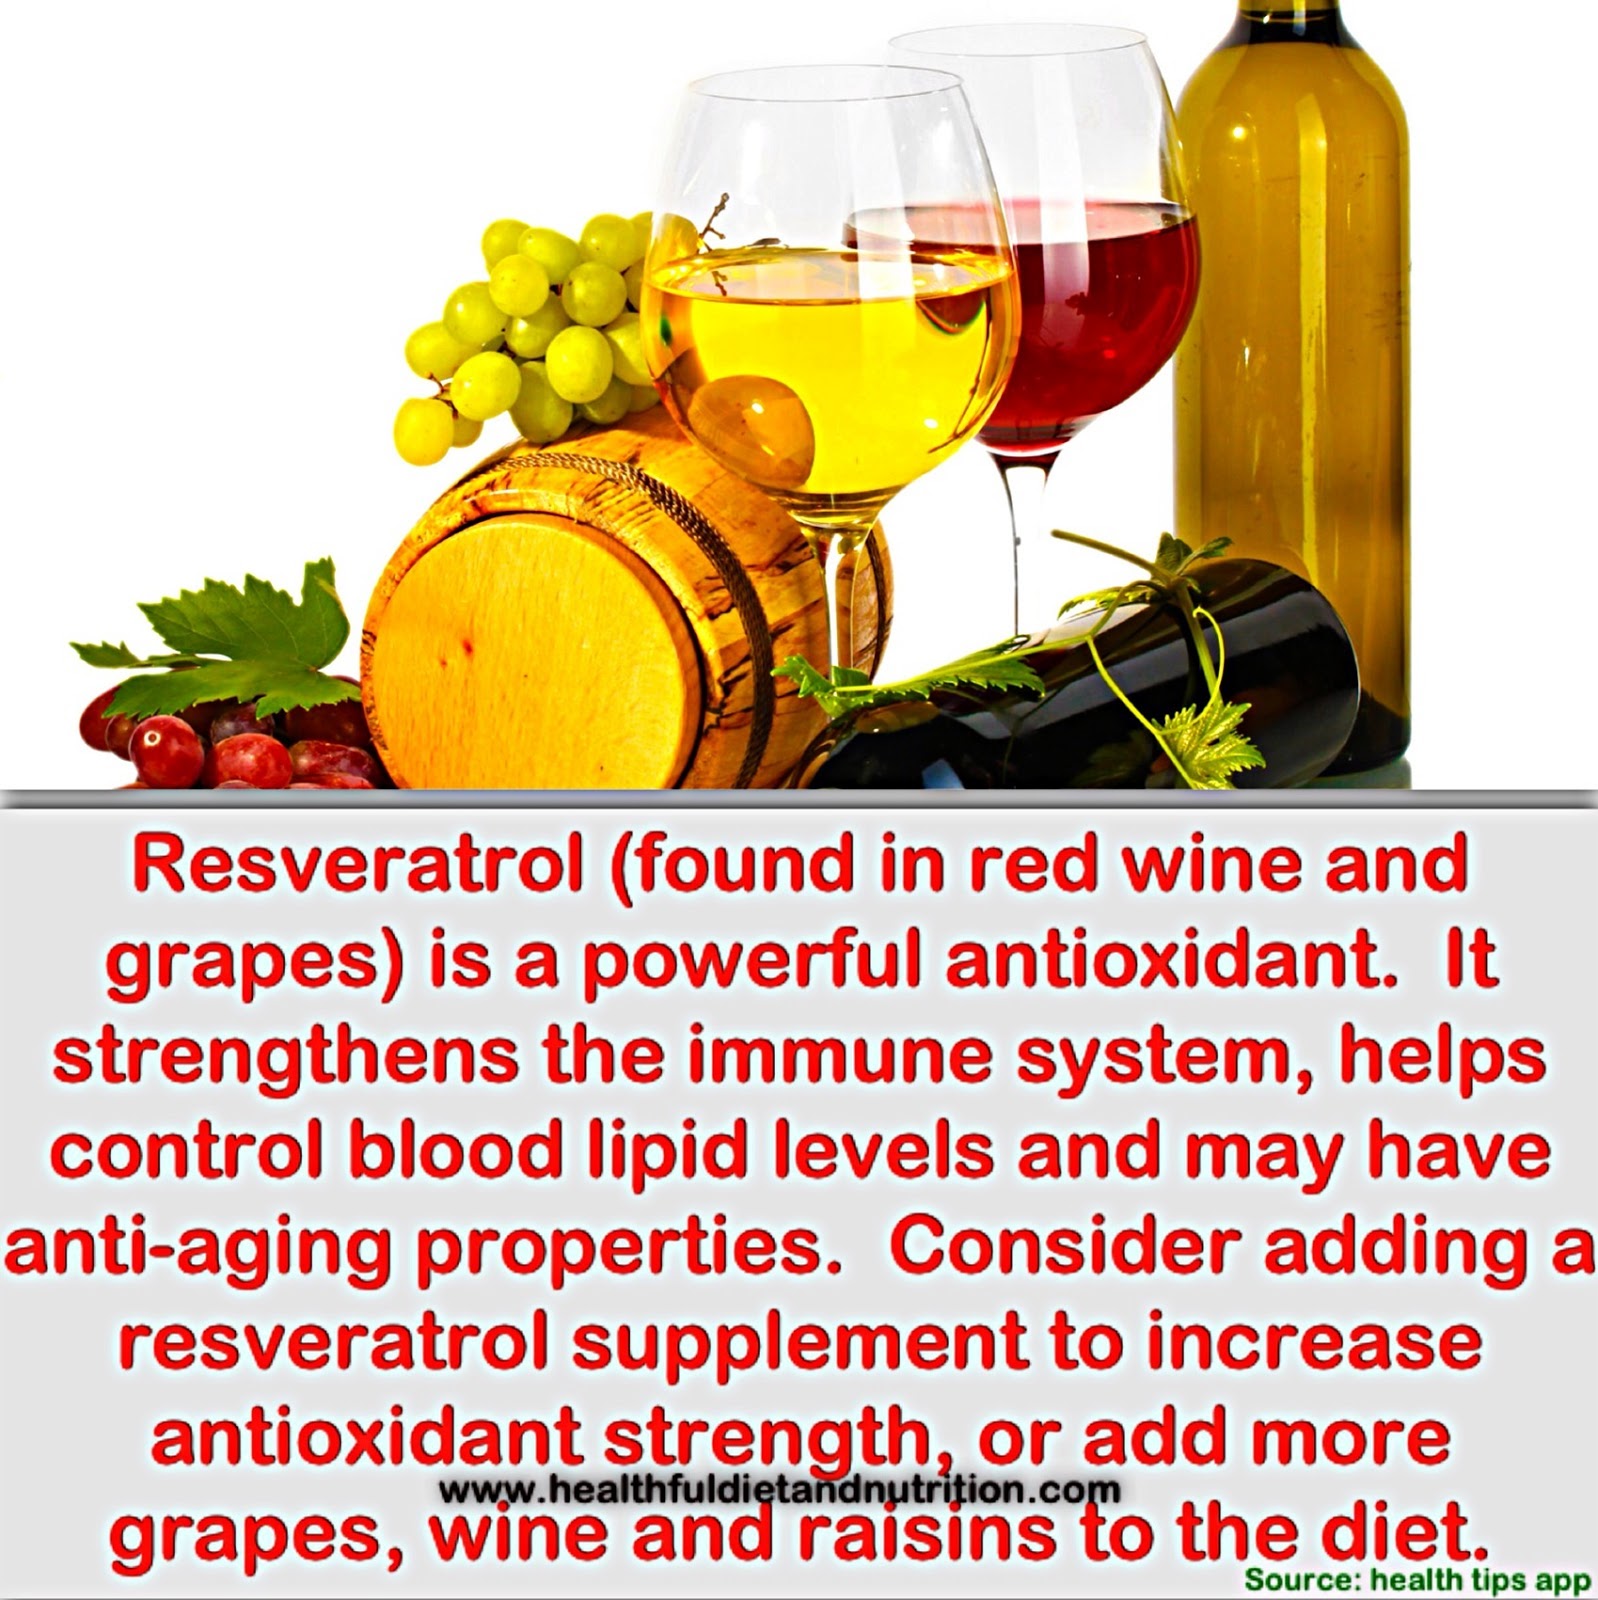 Resveratrol (found in red wine and grapes) is a powerful antioxidant. It strengthens the immune system, helps control blood lipid levels and may have anti-aging properties. Consider adding a resveratrol supplement to increase antioxidant strength, or add more grapes, wine and raisins to the diet.